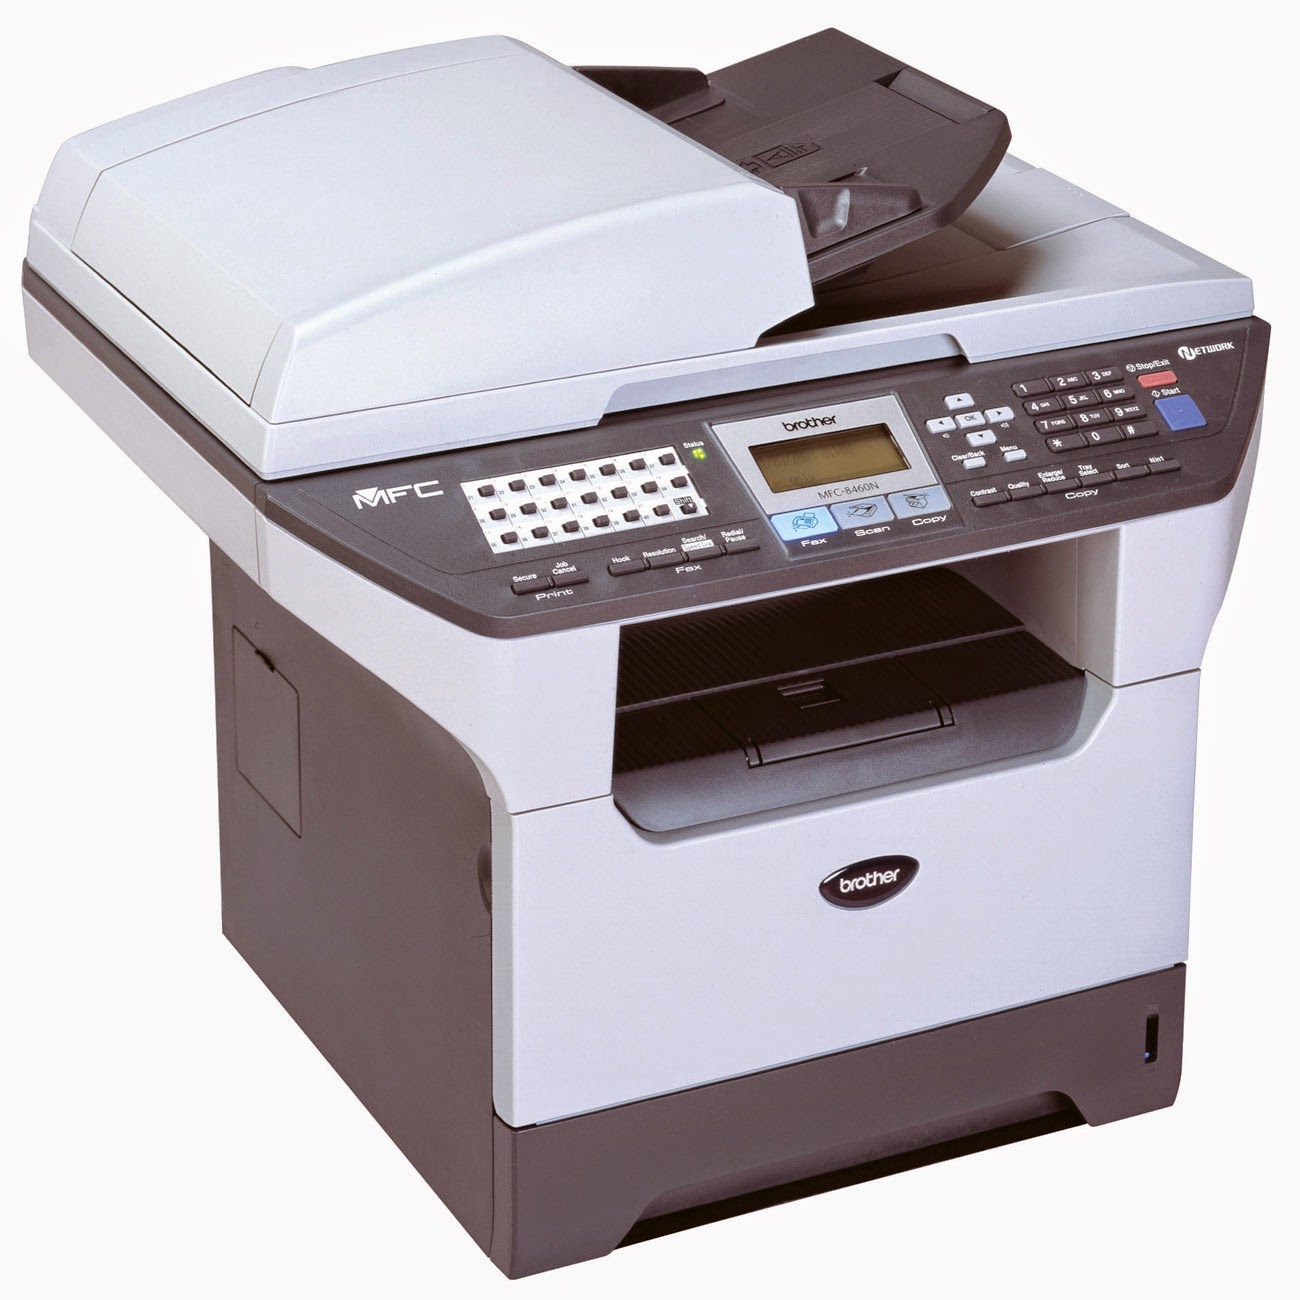 brother printer mfc 8460n driver